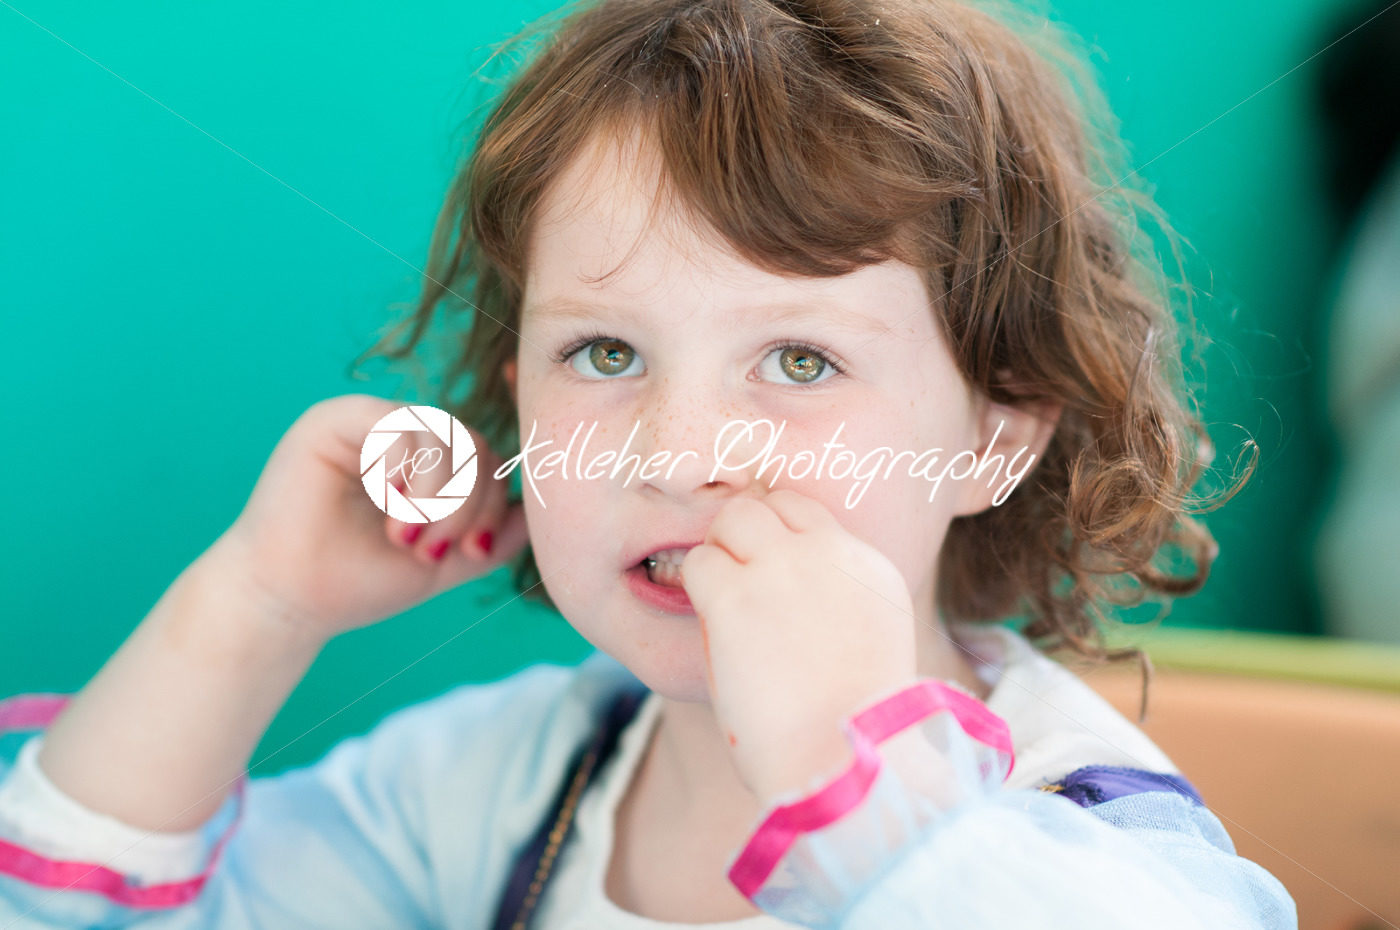 Close up Portrait of young girl eating - Kelleher Photography Store